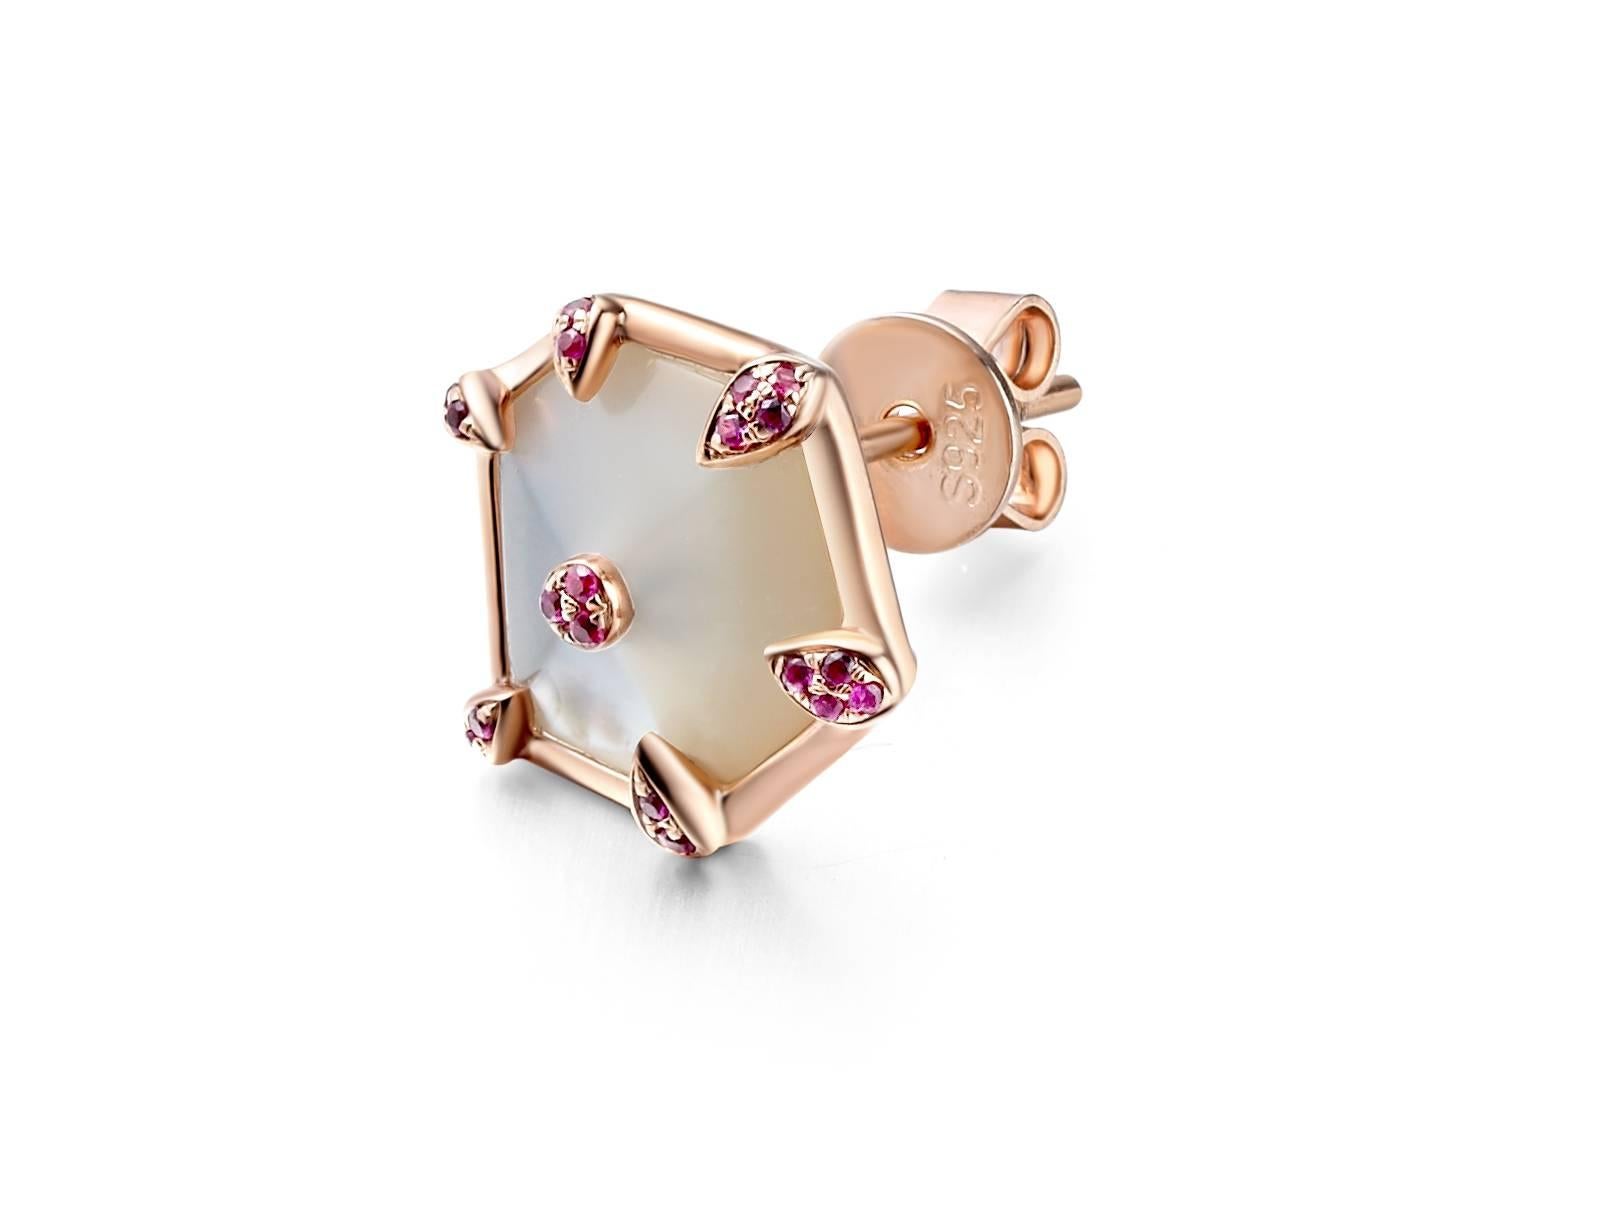 Description:
Nova hexagon stud drop earrings 0.096ct pink sapphires and 3ct mother of pearl, set in 18ct rose gold.

Inspiration
The Nova Collection embodies the essence of freedom and having the courage to explore new adventures – much like the